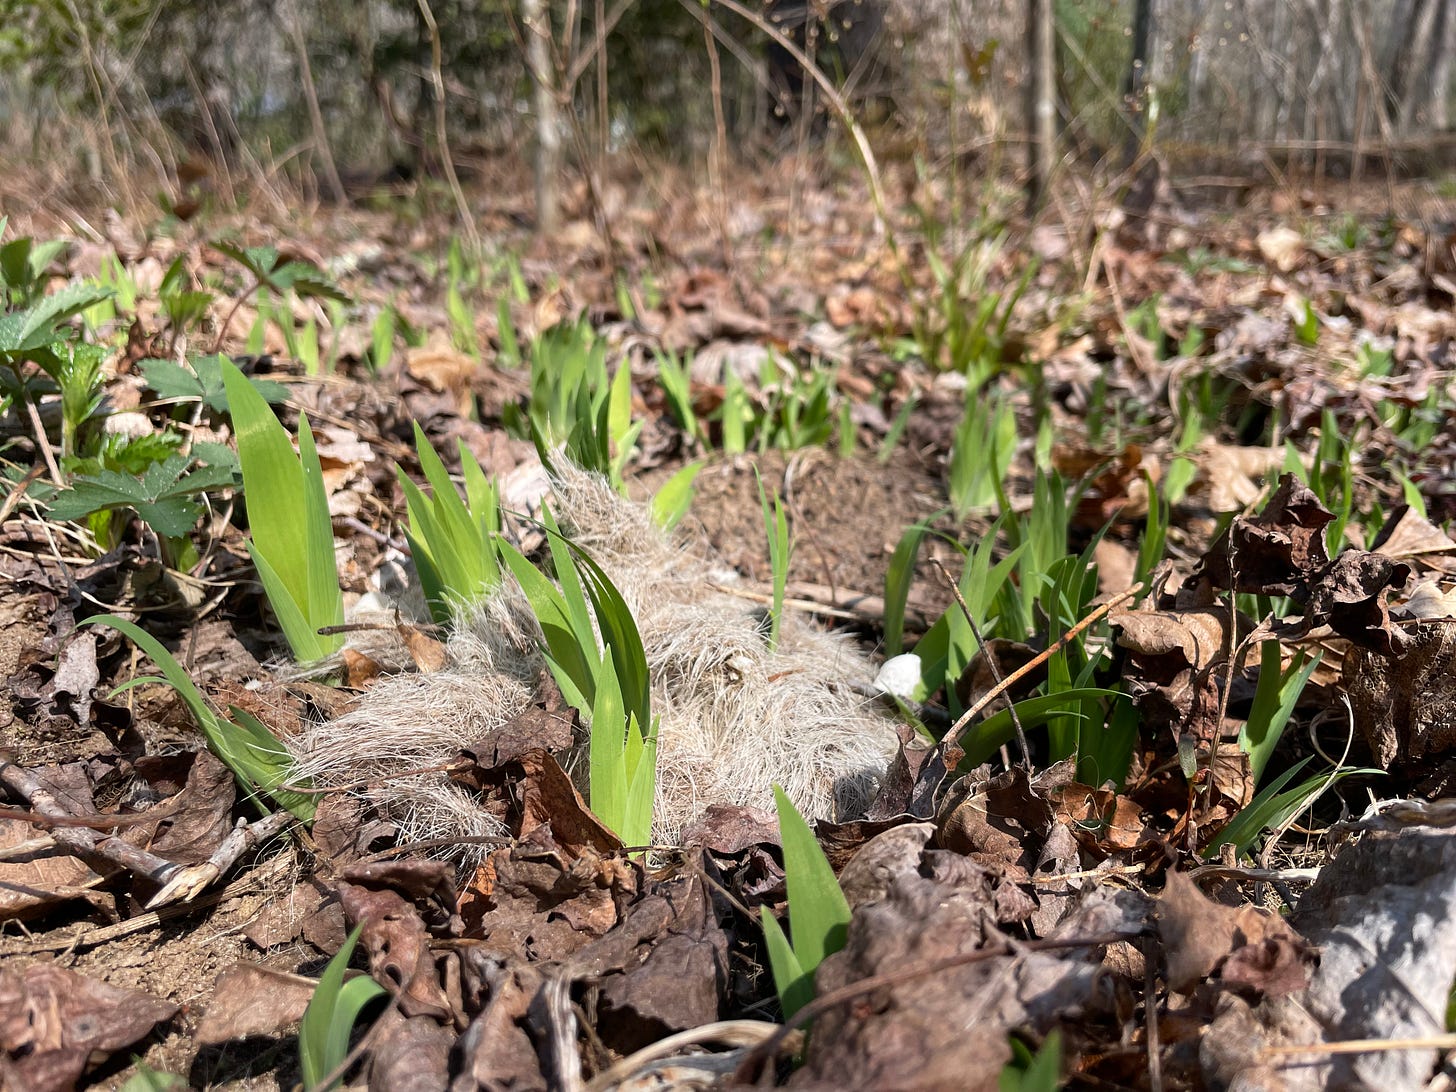 tuft of grey-brown-white fur in a stand of wild iris shoots